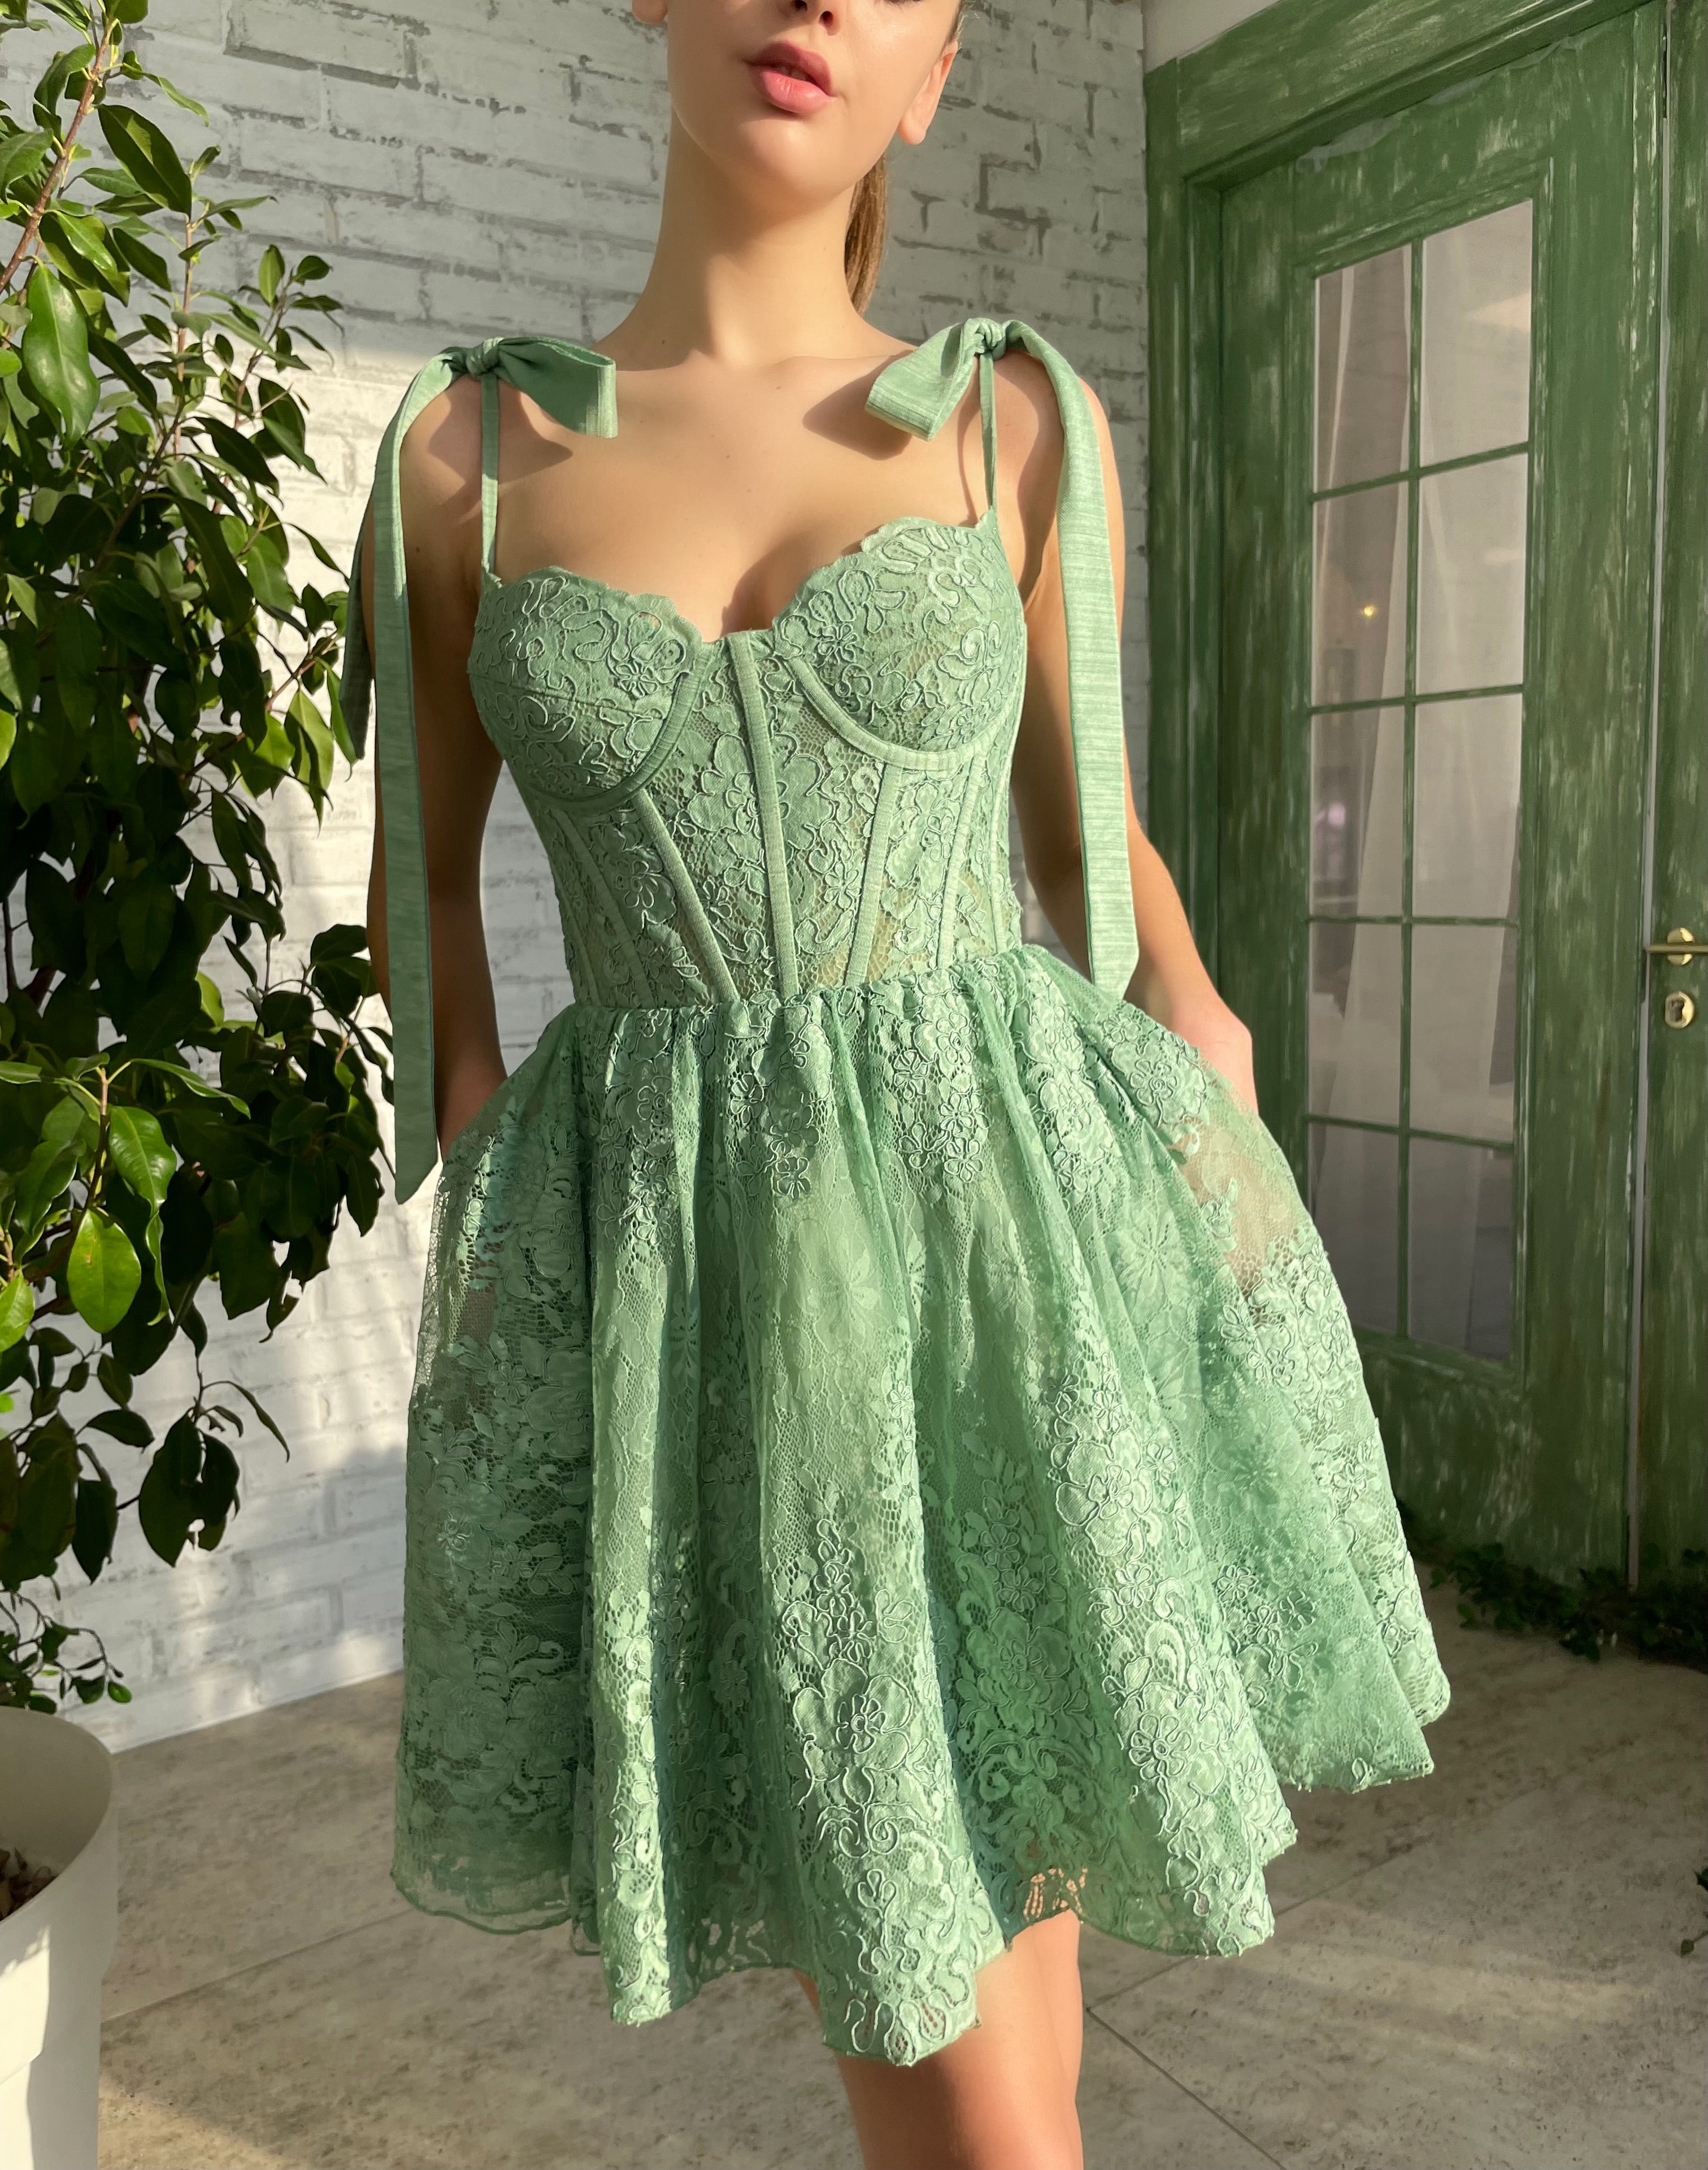 Green mini dress with bow straps